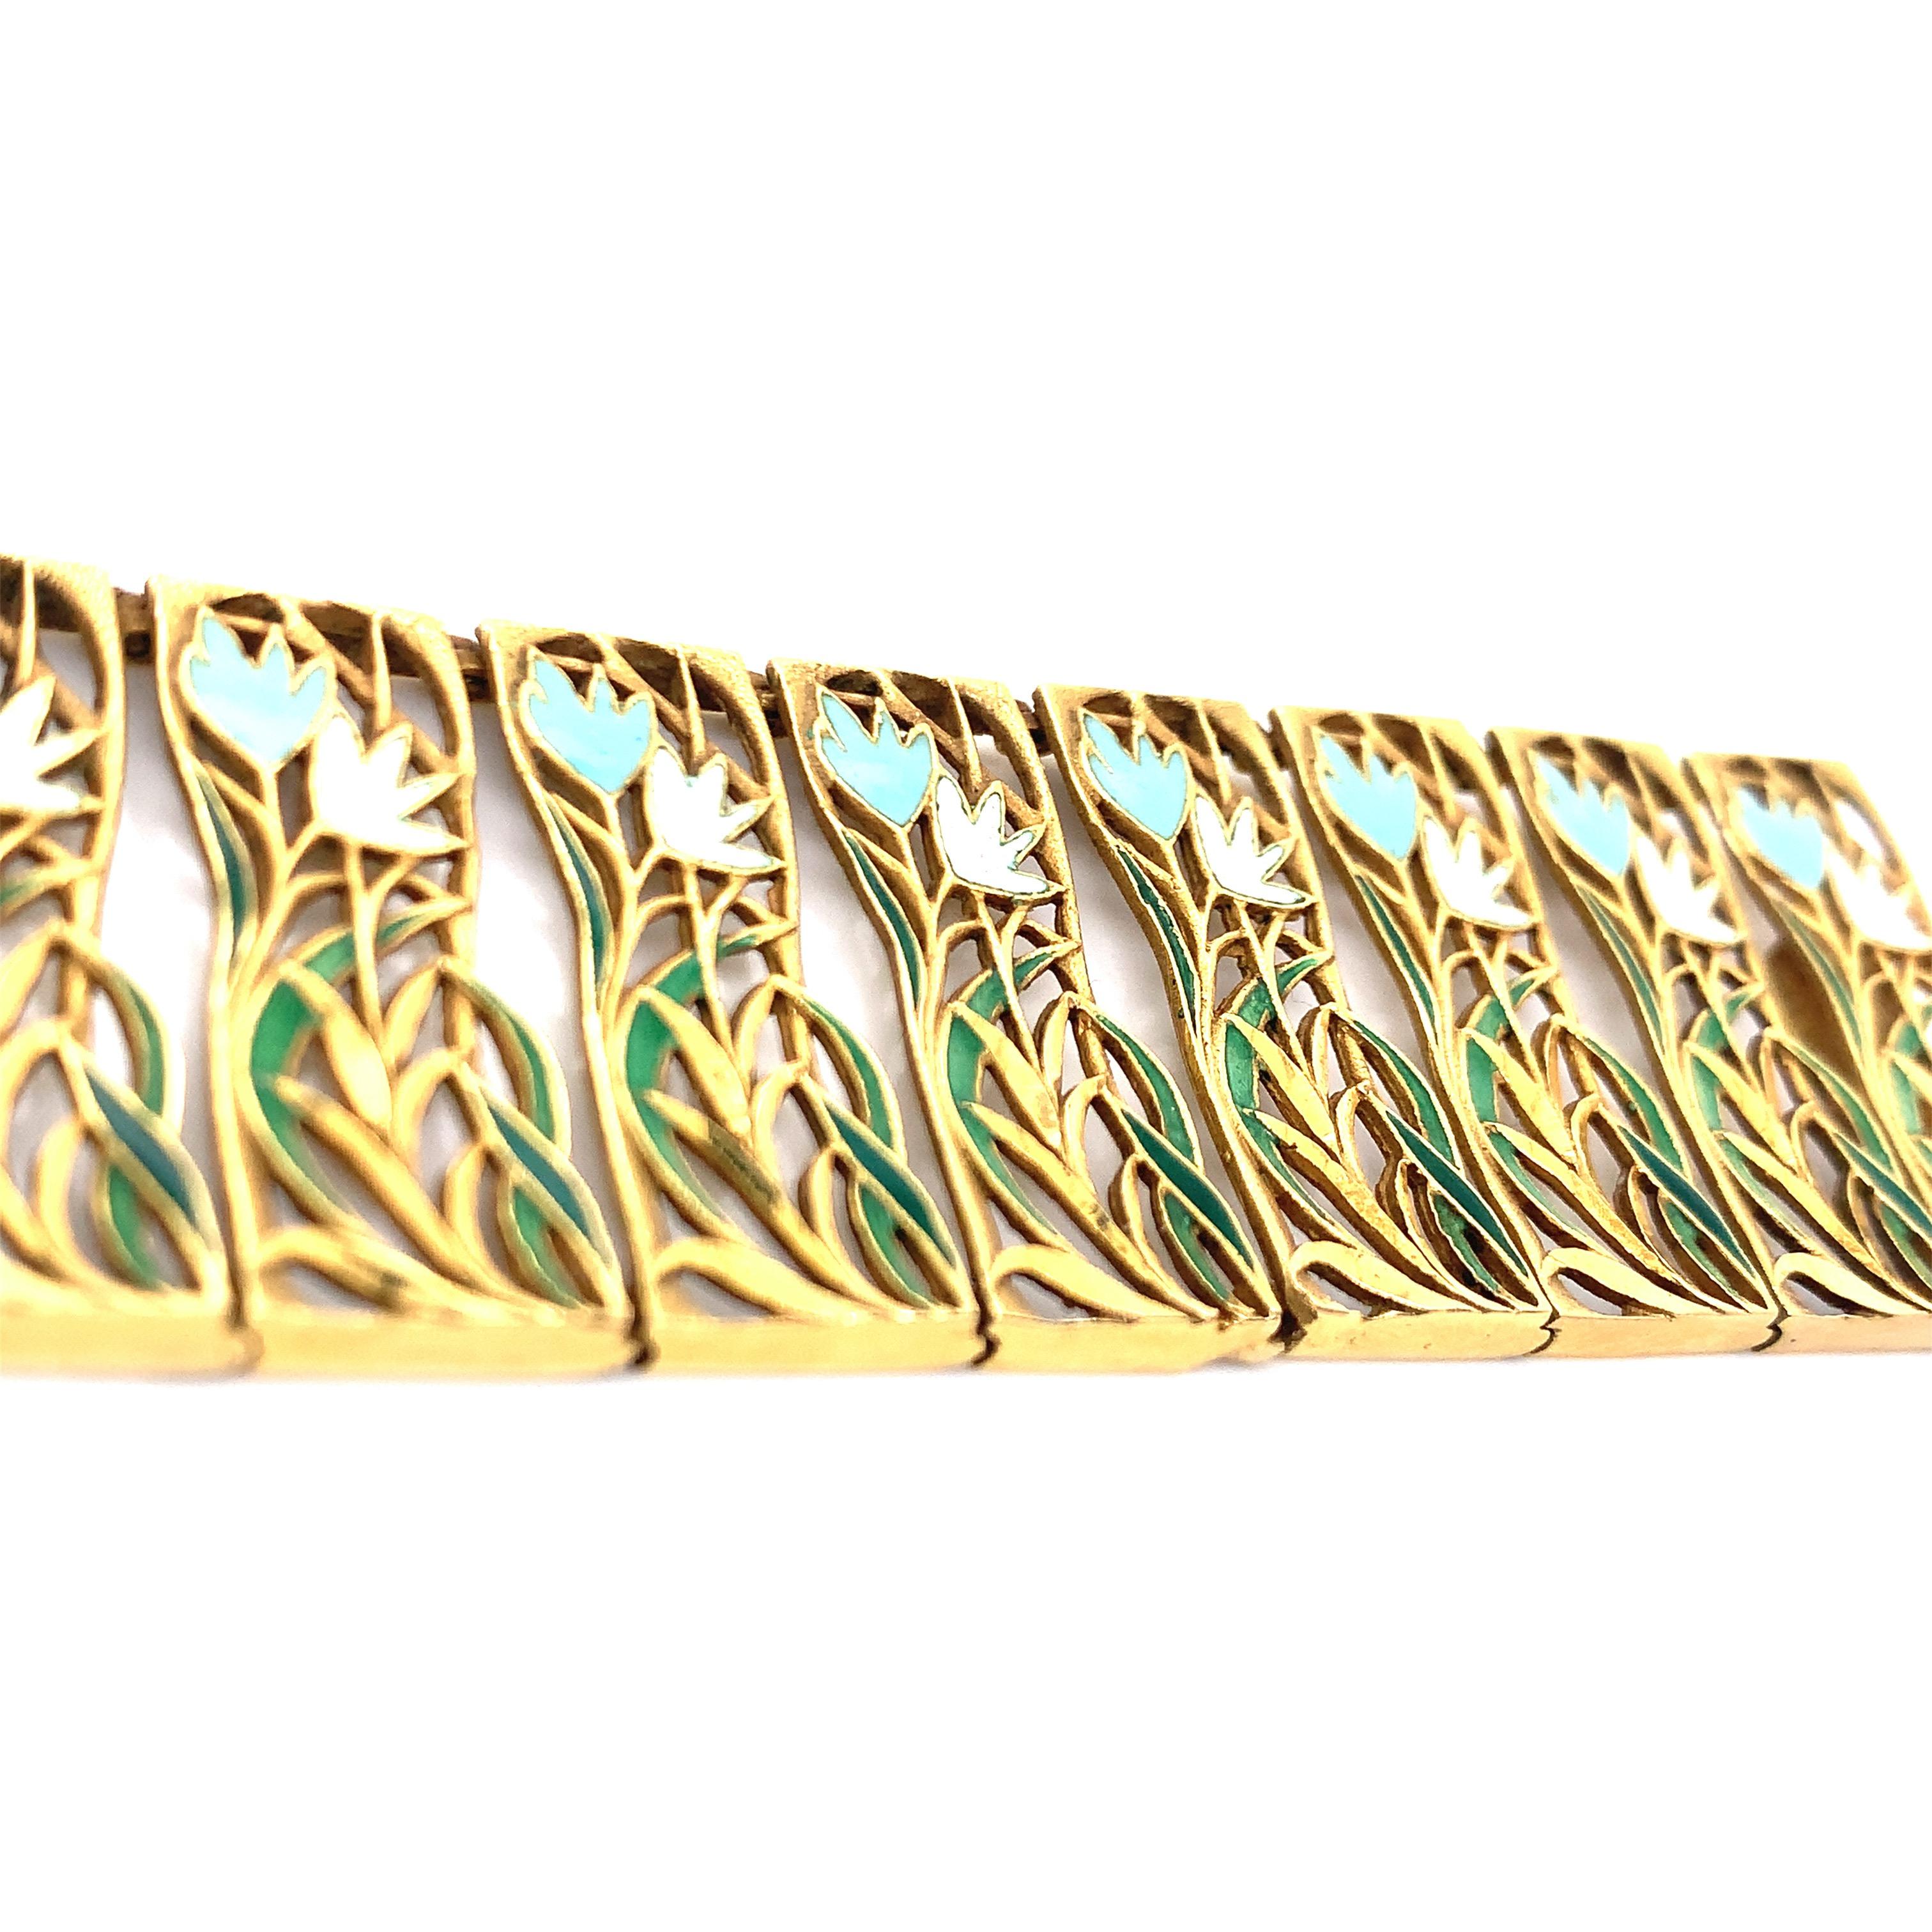 An 18k yellow gold bracelet with an art nouveau design. It features flowers and leaves motifs created through enamel. This flora related piece weighs 49.4 grams with an inner circumference of 7.38 inches. 